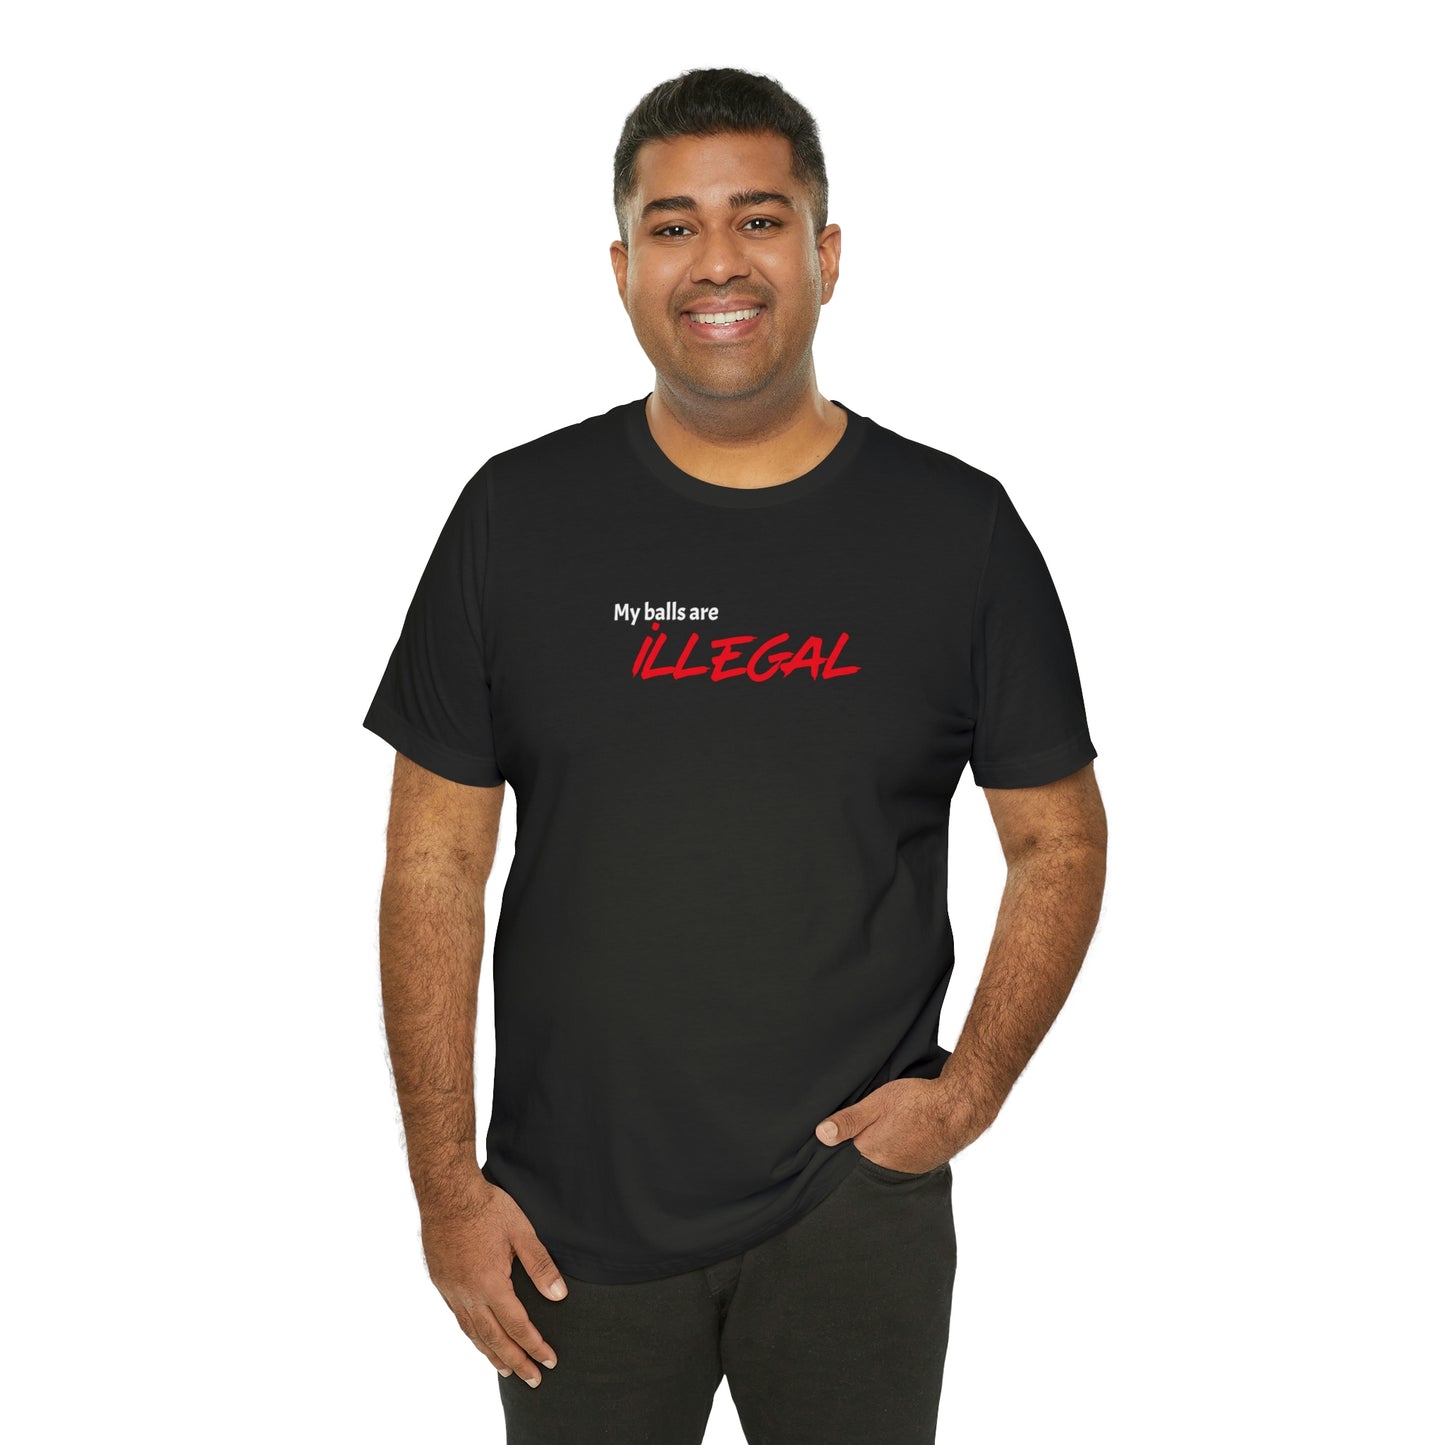 My balls are ILLEGAL Tee